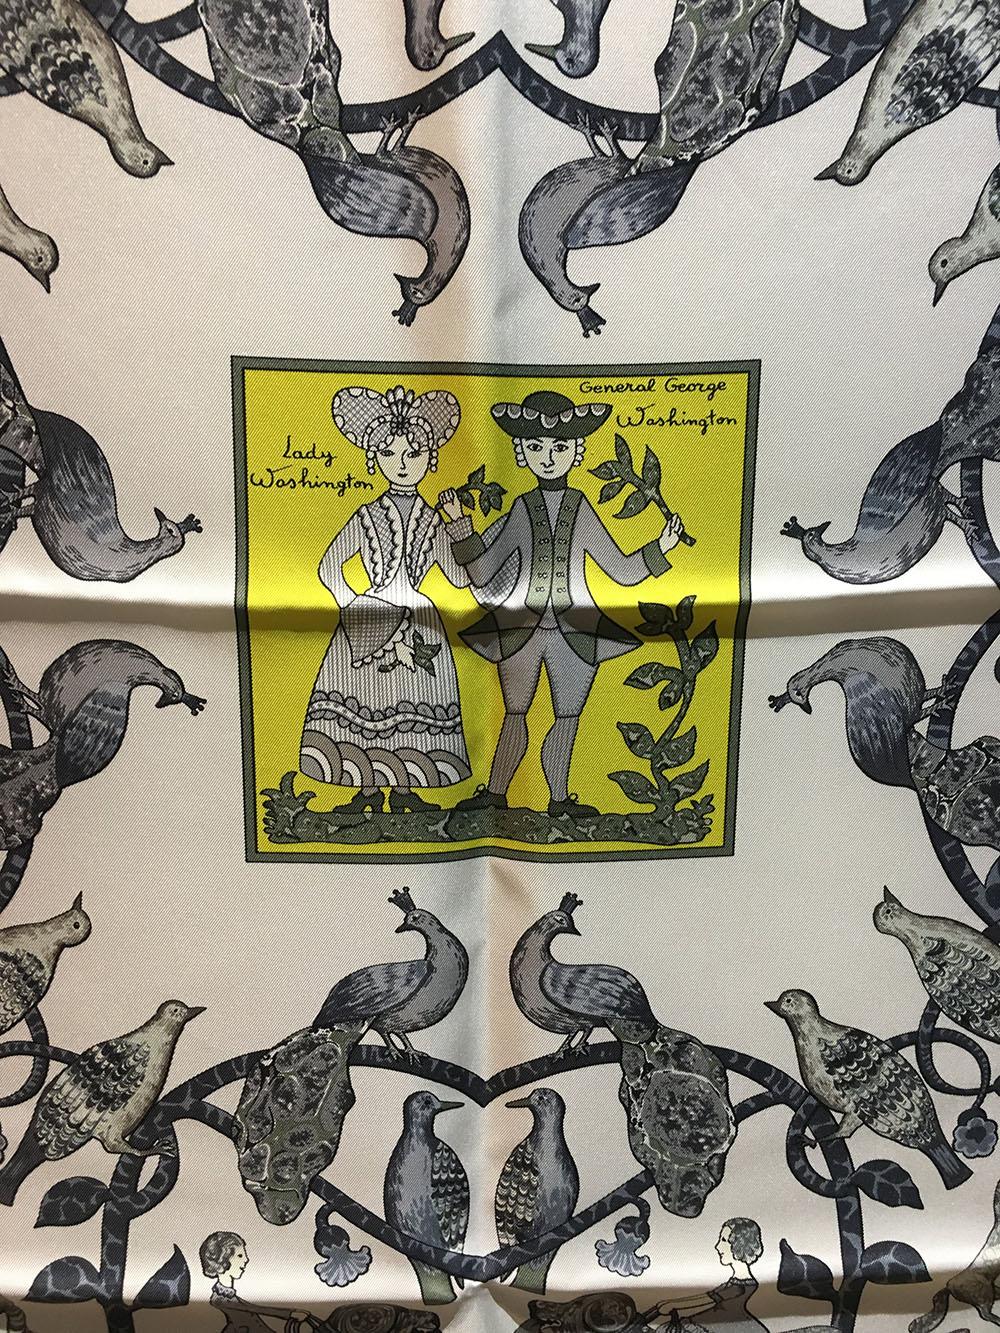 Hermes Early America Chartreuse Yellow Silk Scarf in excellent condition. Original silk screen design c2012 by Francoise de la Perriere features an artistic rendition of Lady Washington and General George Washington in a center square with a black